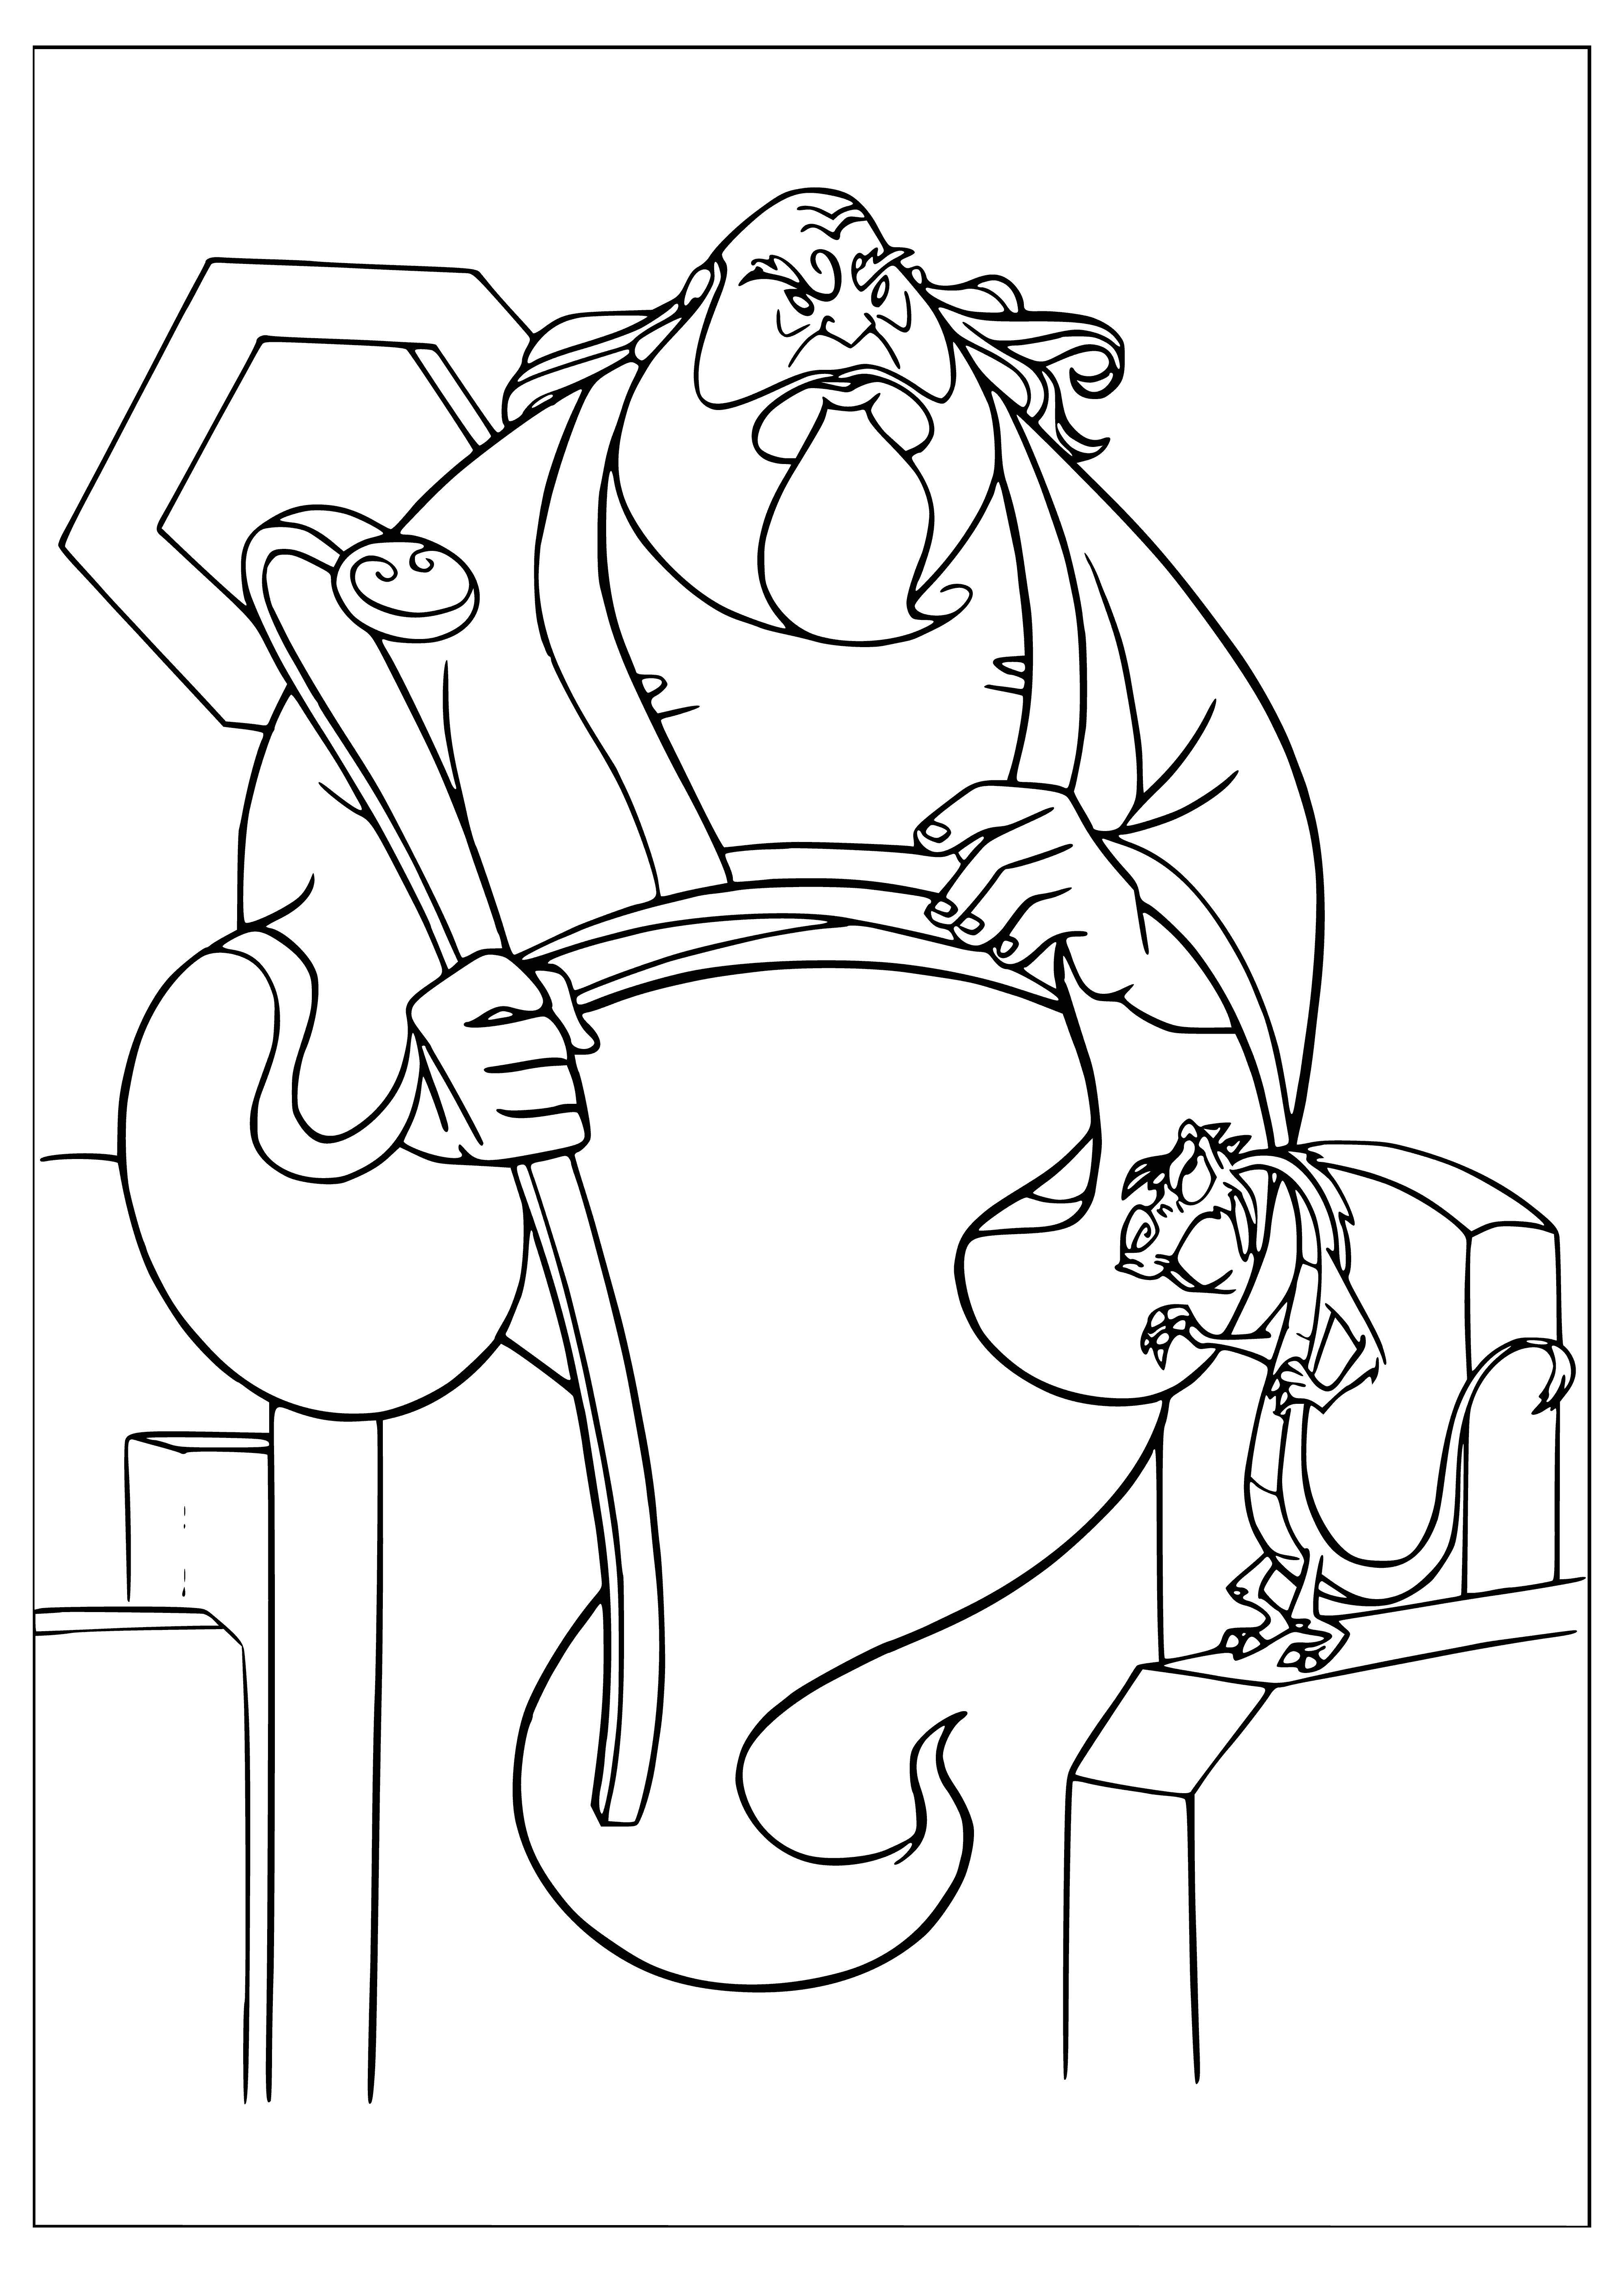 coloring page: Carved wooden statue of woman in Chinese dress, arms raised in air with serene expression. One foot atop a stone in stylized pose.